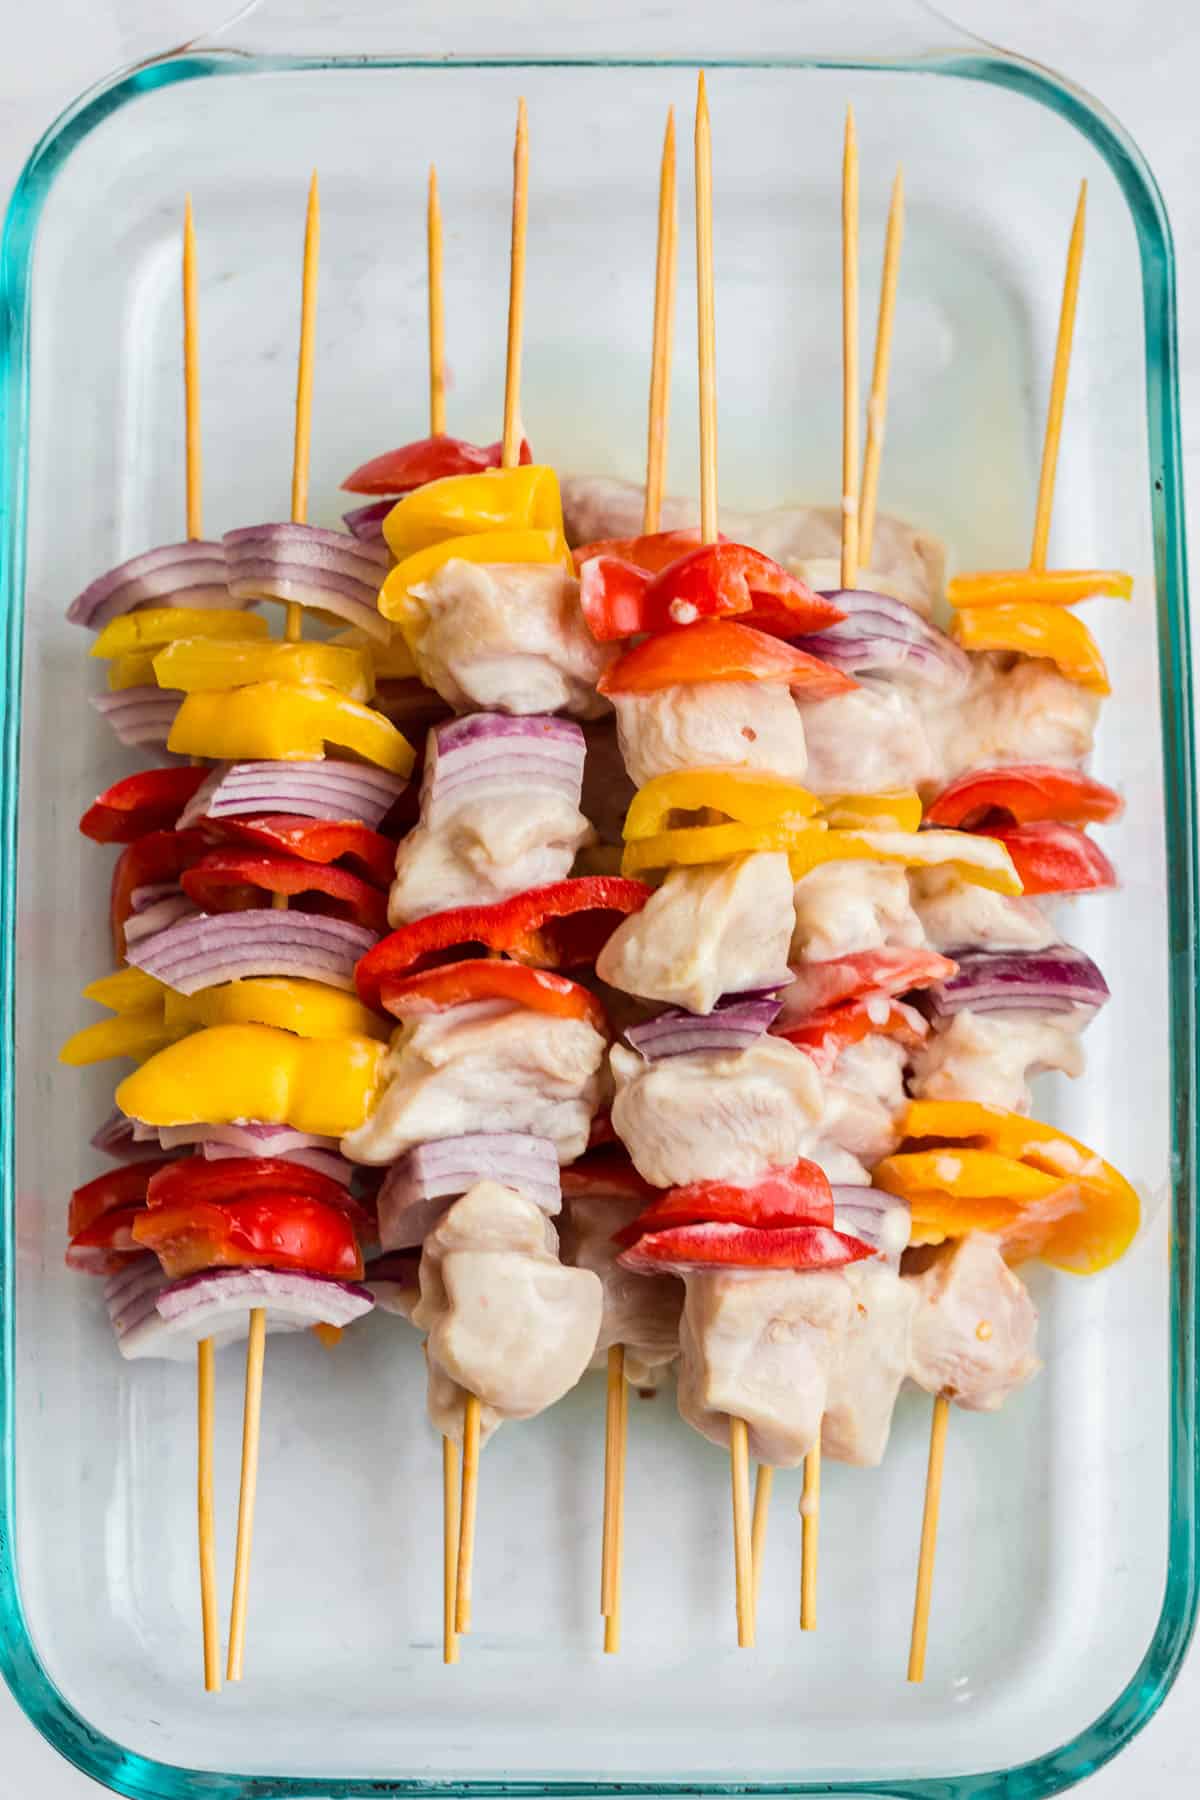 chicken skewers with red pepper, yellow pepper, and red onion